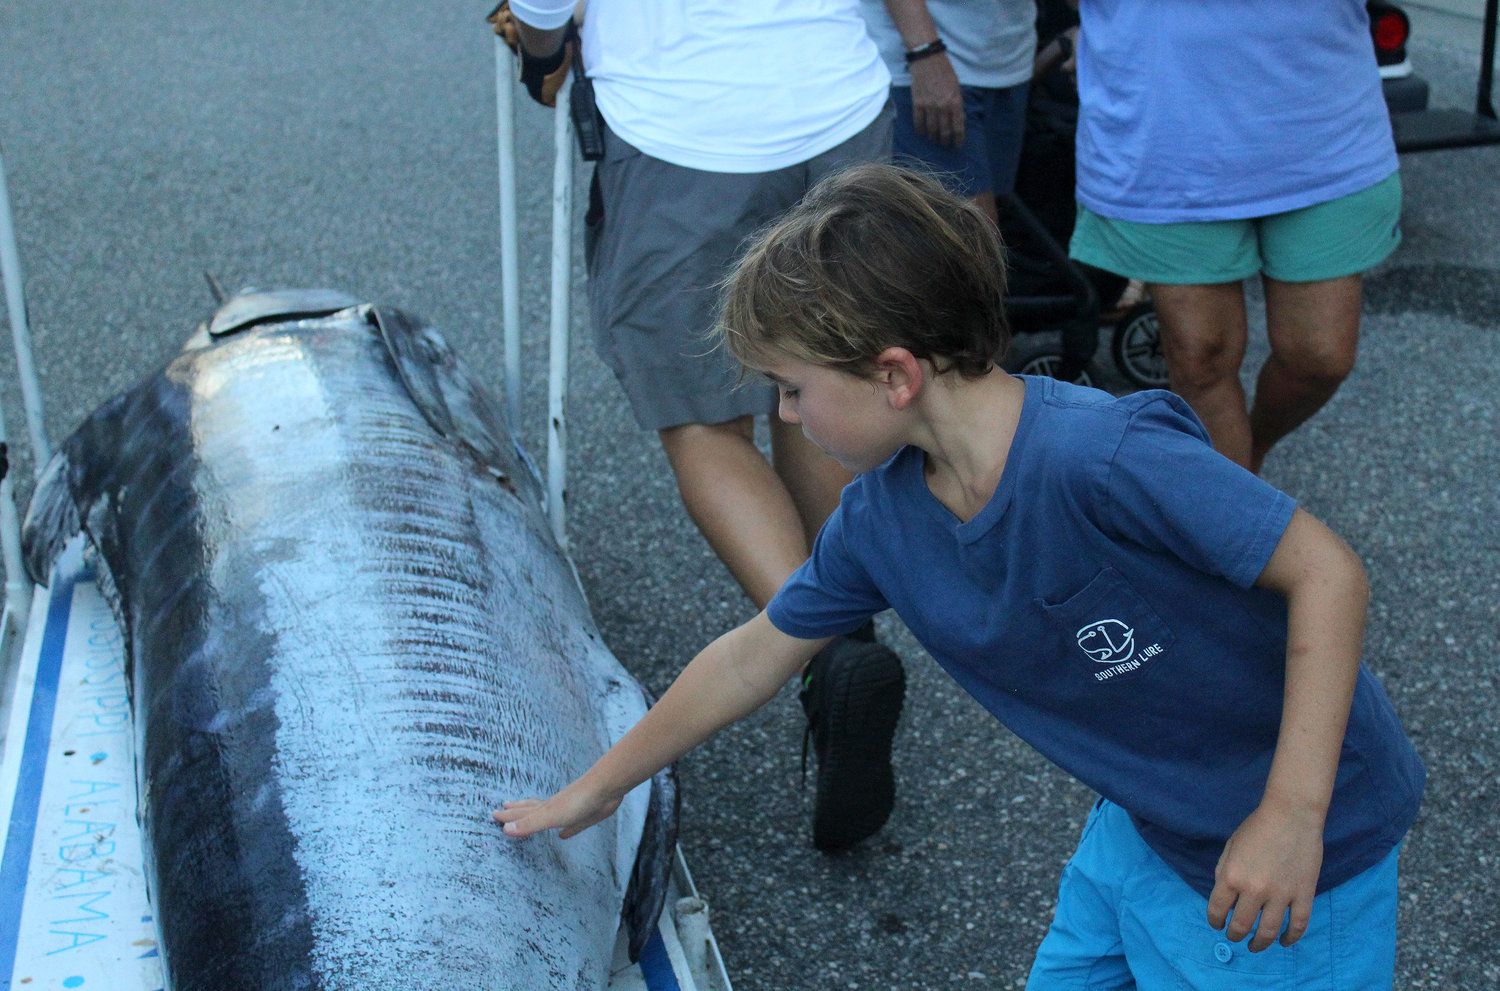 Young fans got an up close and personal look at the winning marlin before it was loaded onto a trailer to be processed and donated to fight food insecurity in Baldwin County.